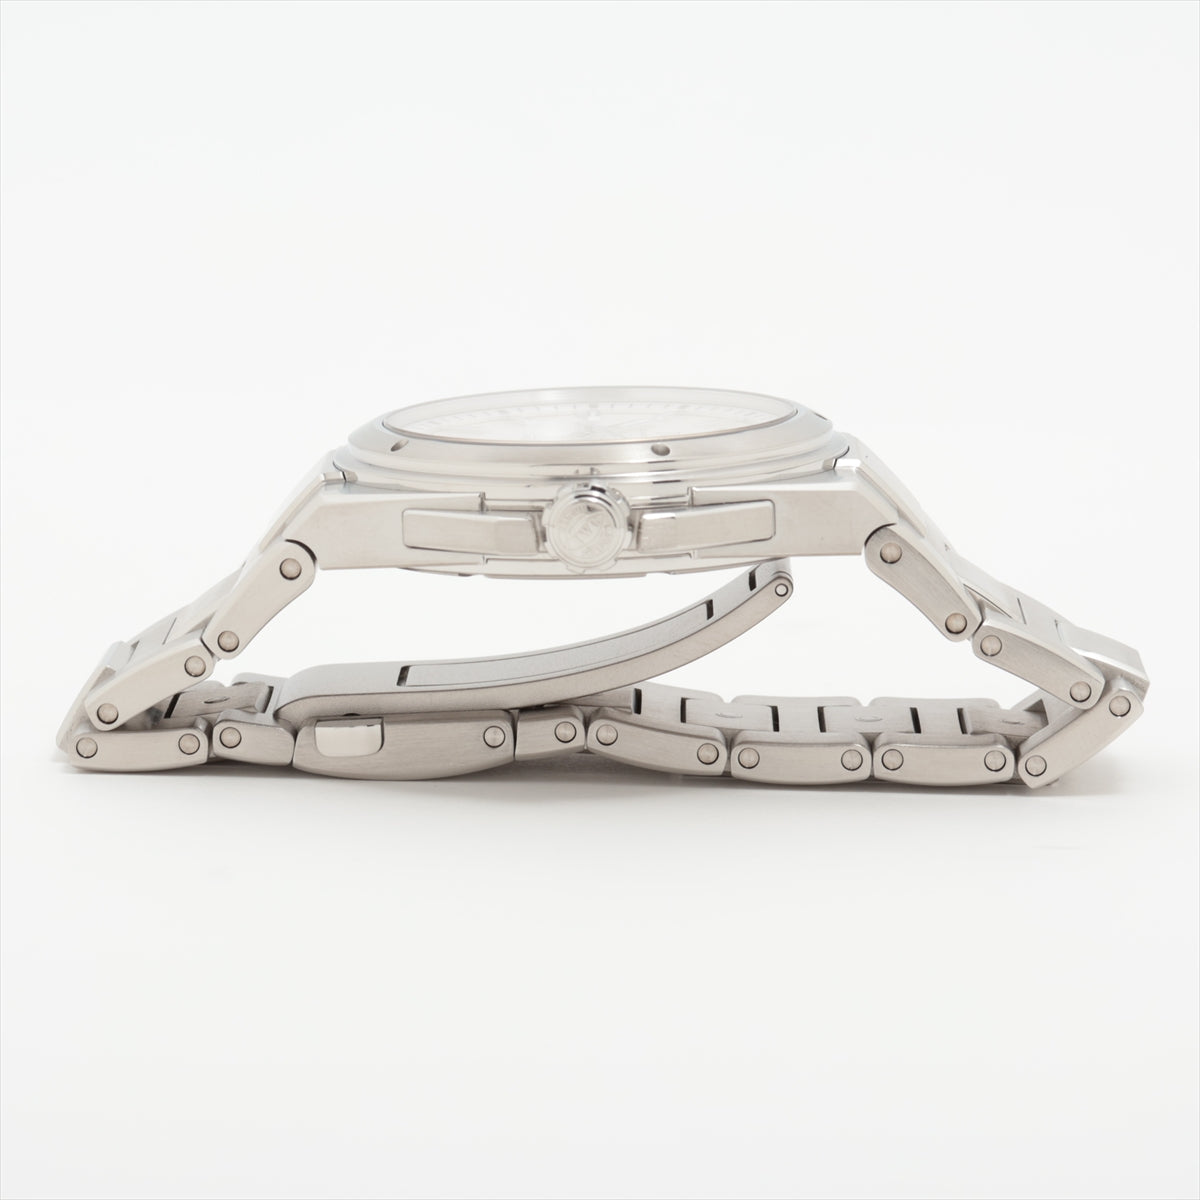 IWC Ingenieur IW323904 SS AT Silver Dial 4 Extra Links